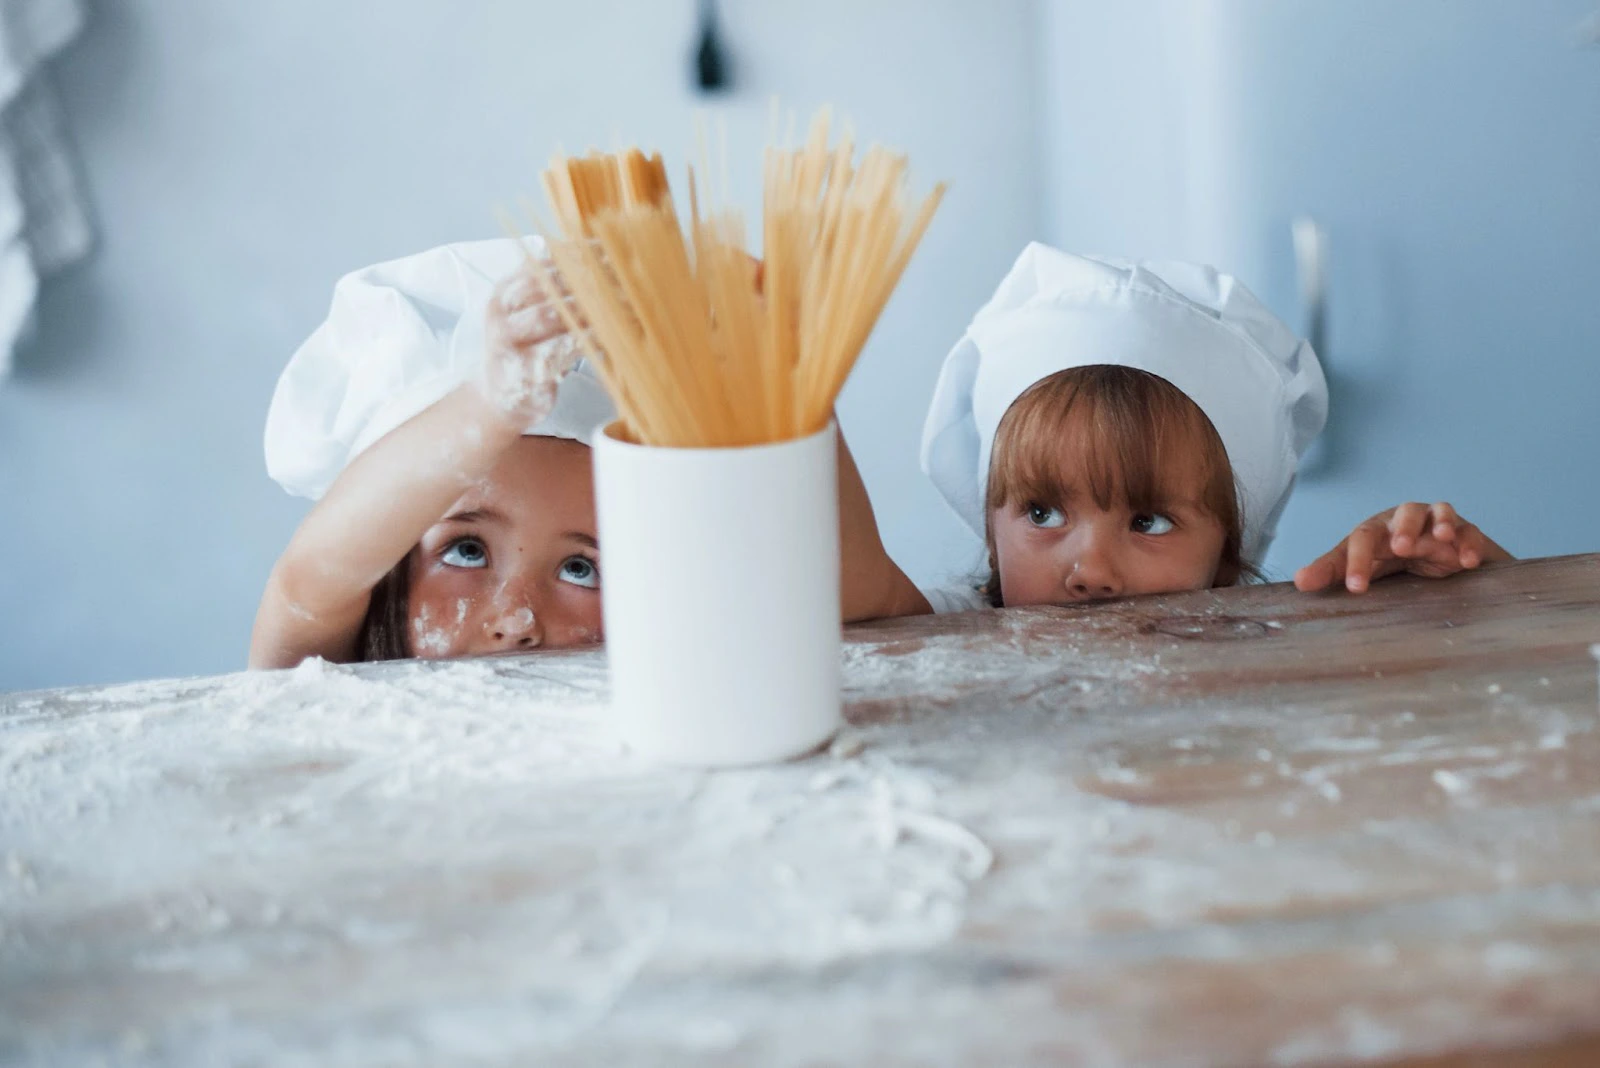 Two children wearing chefs' hats in front of a flour-dusted counter